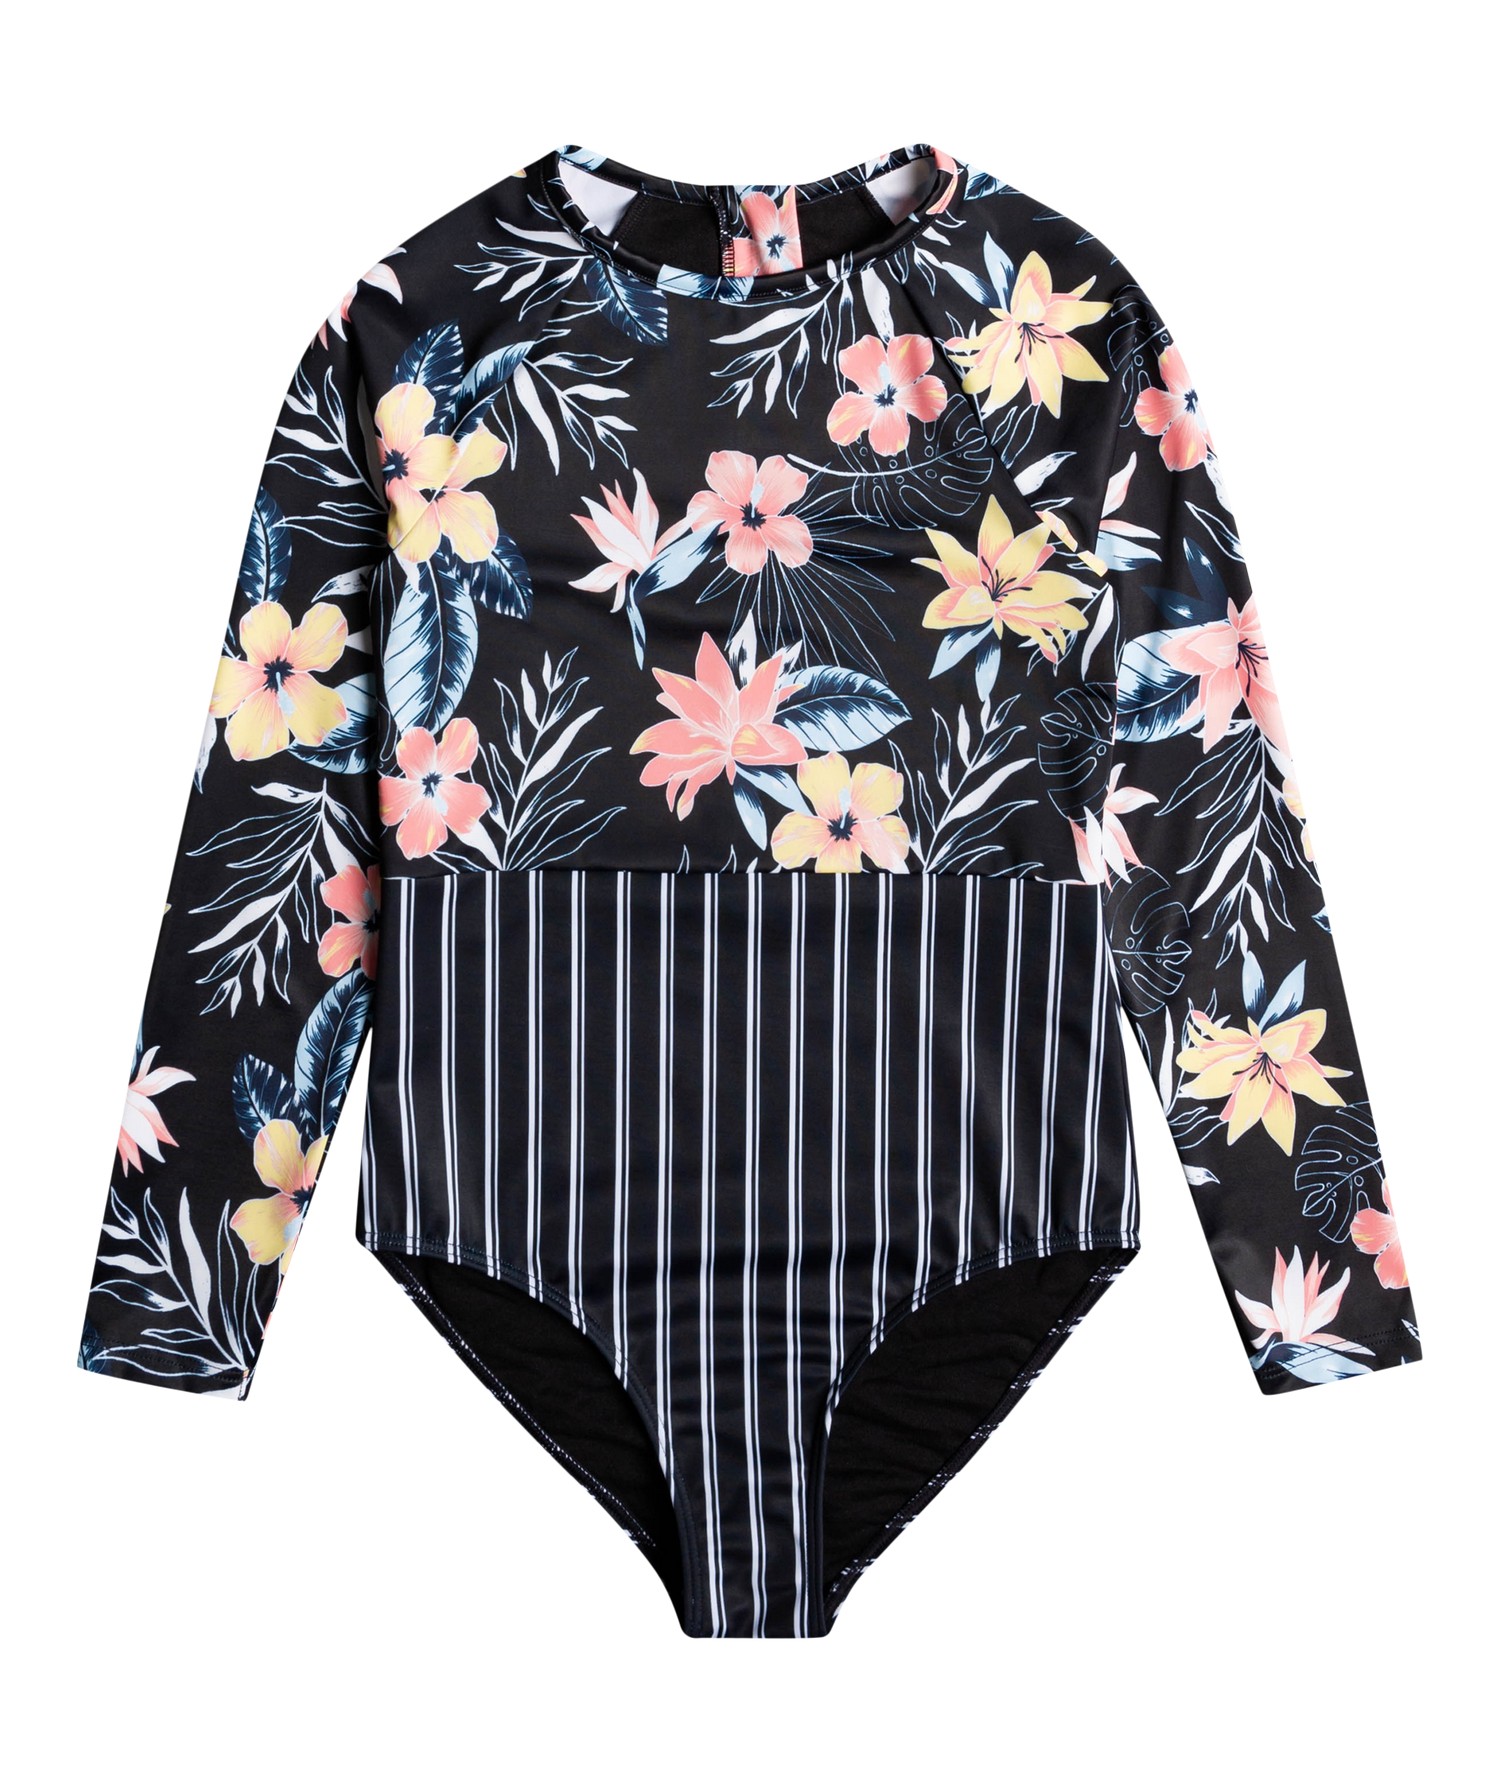 Roxy - UV Swimsuit for girls - Flower Addict with half zipper - Long sleeve - Anthracite/Tropical Breeze